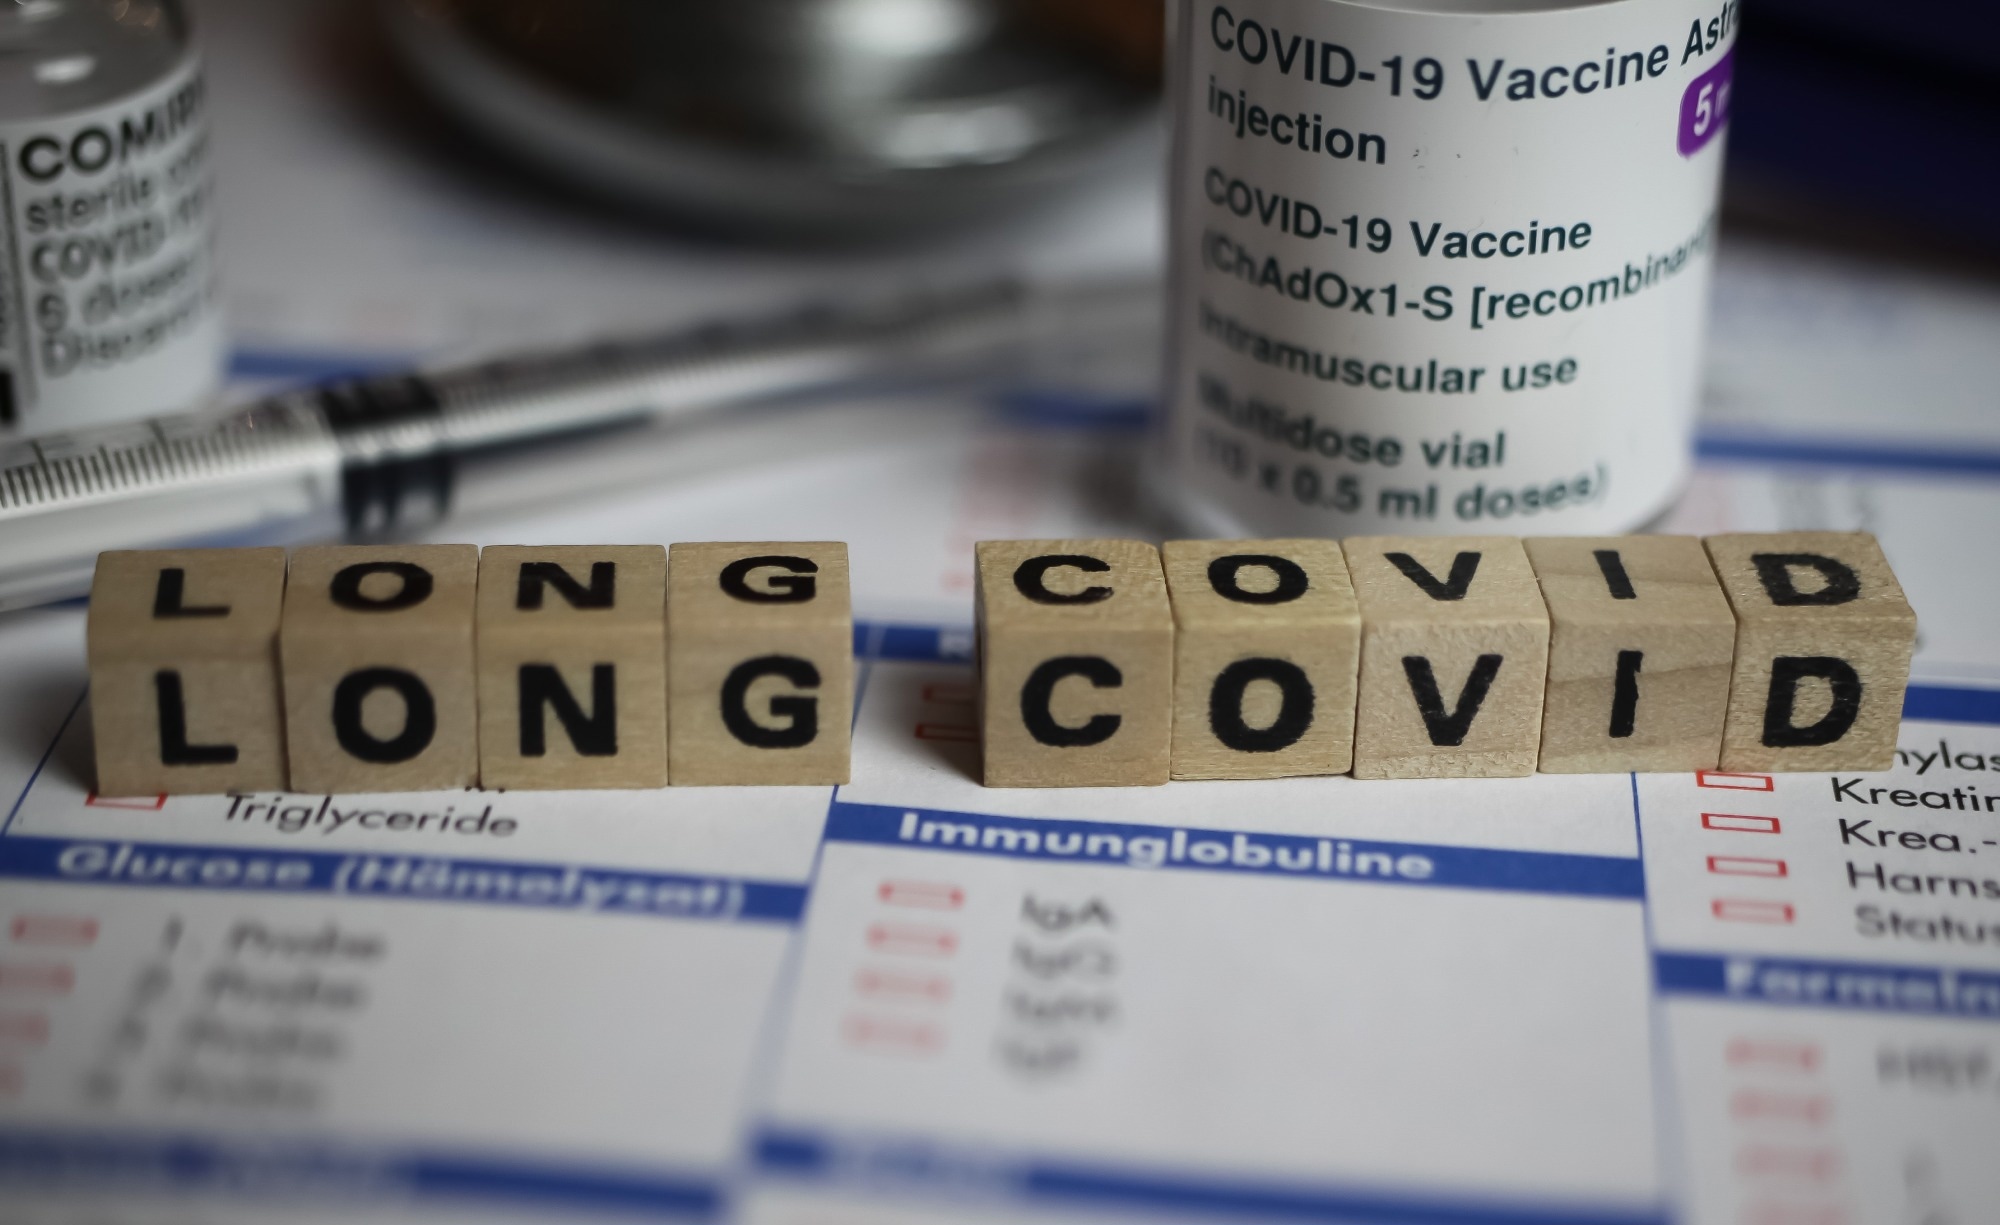 Study: Distinguishing features of Long COVID identified through immune profiling. Image Credit: Ralf Liebhold/Shutterstock